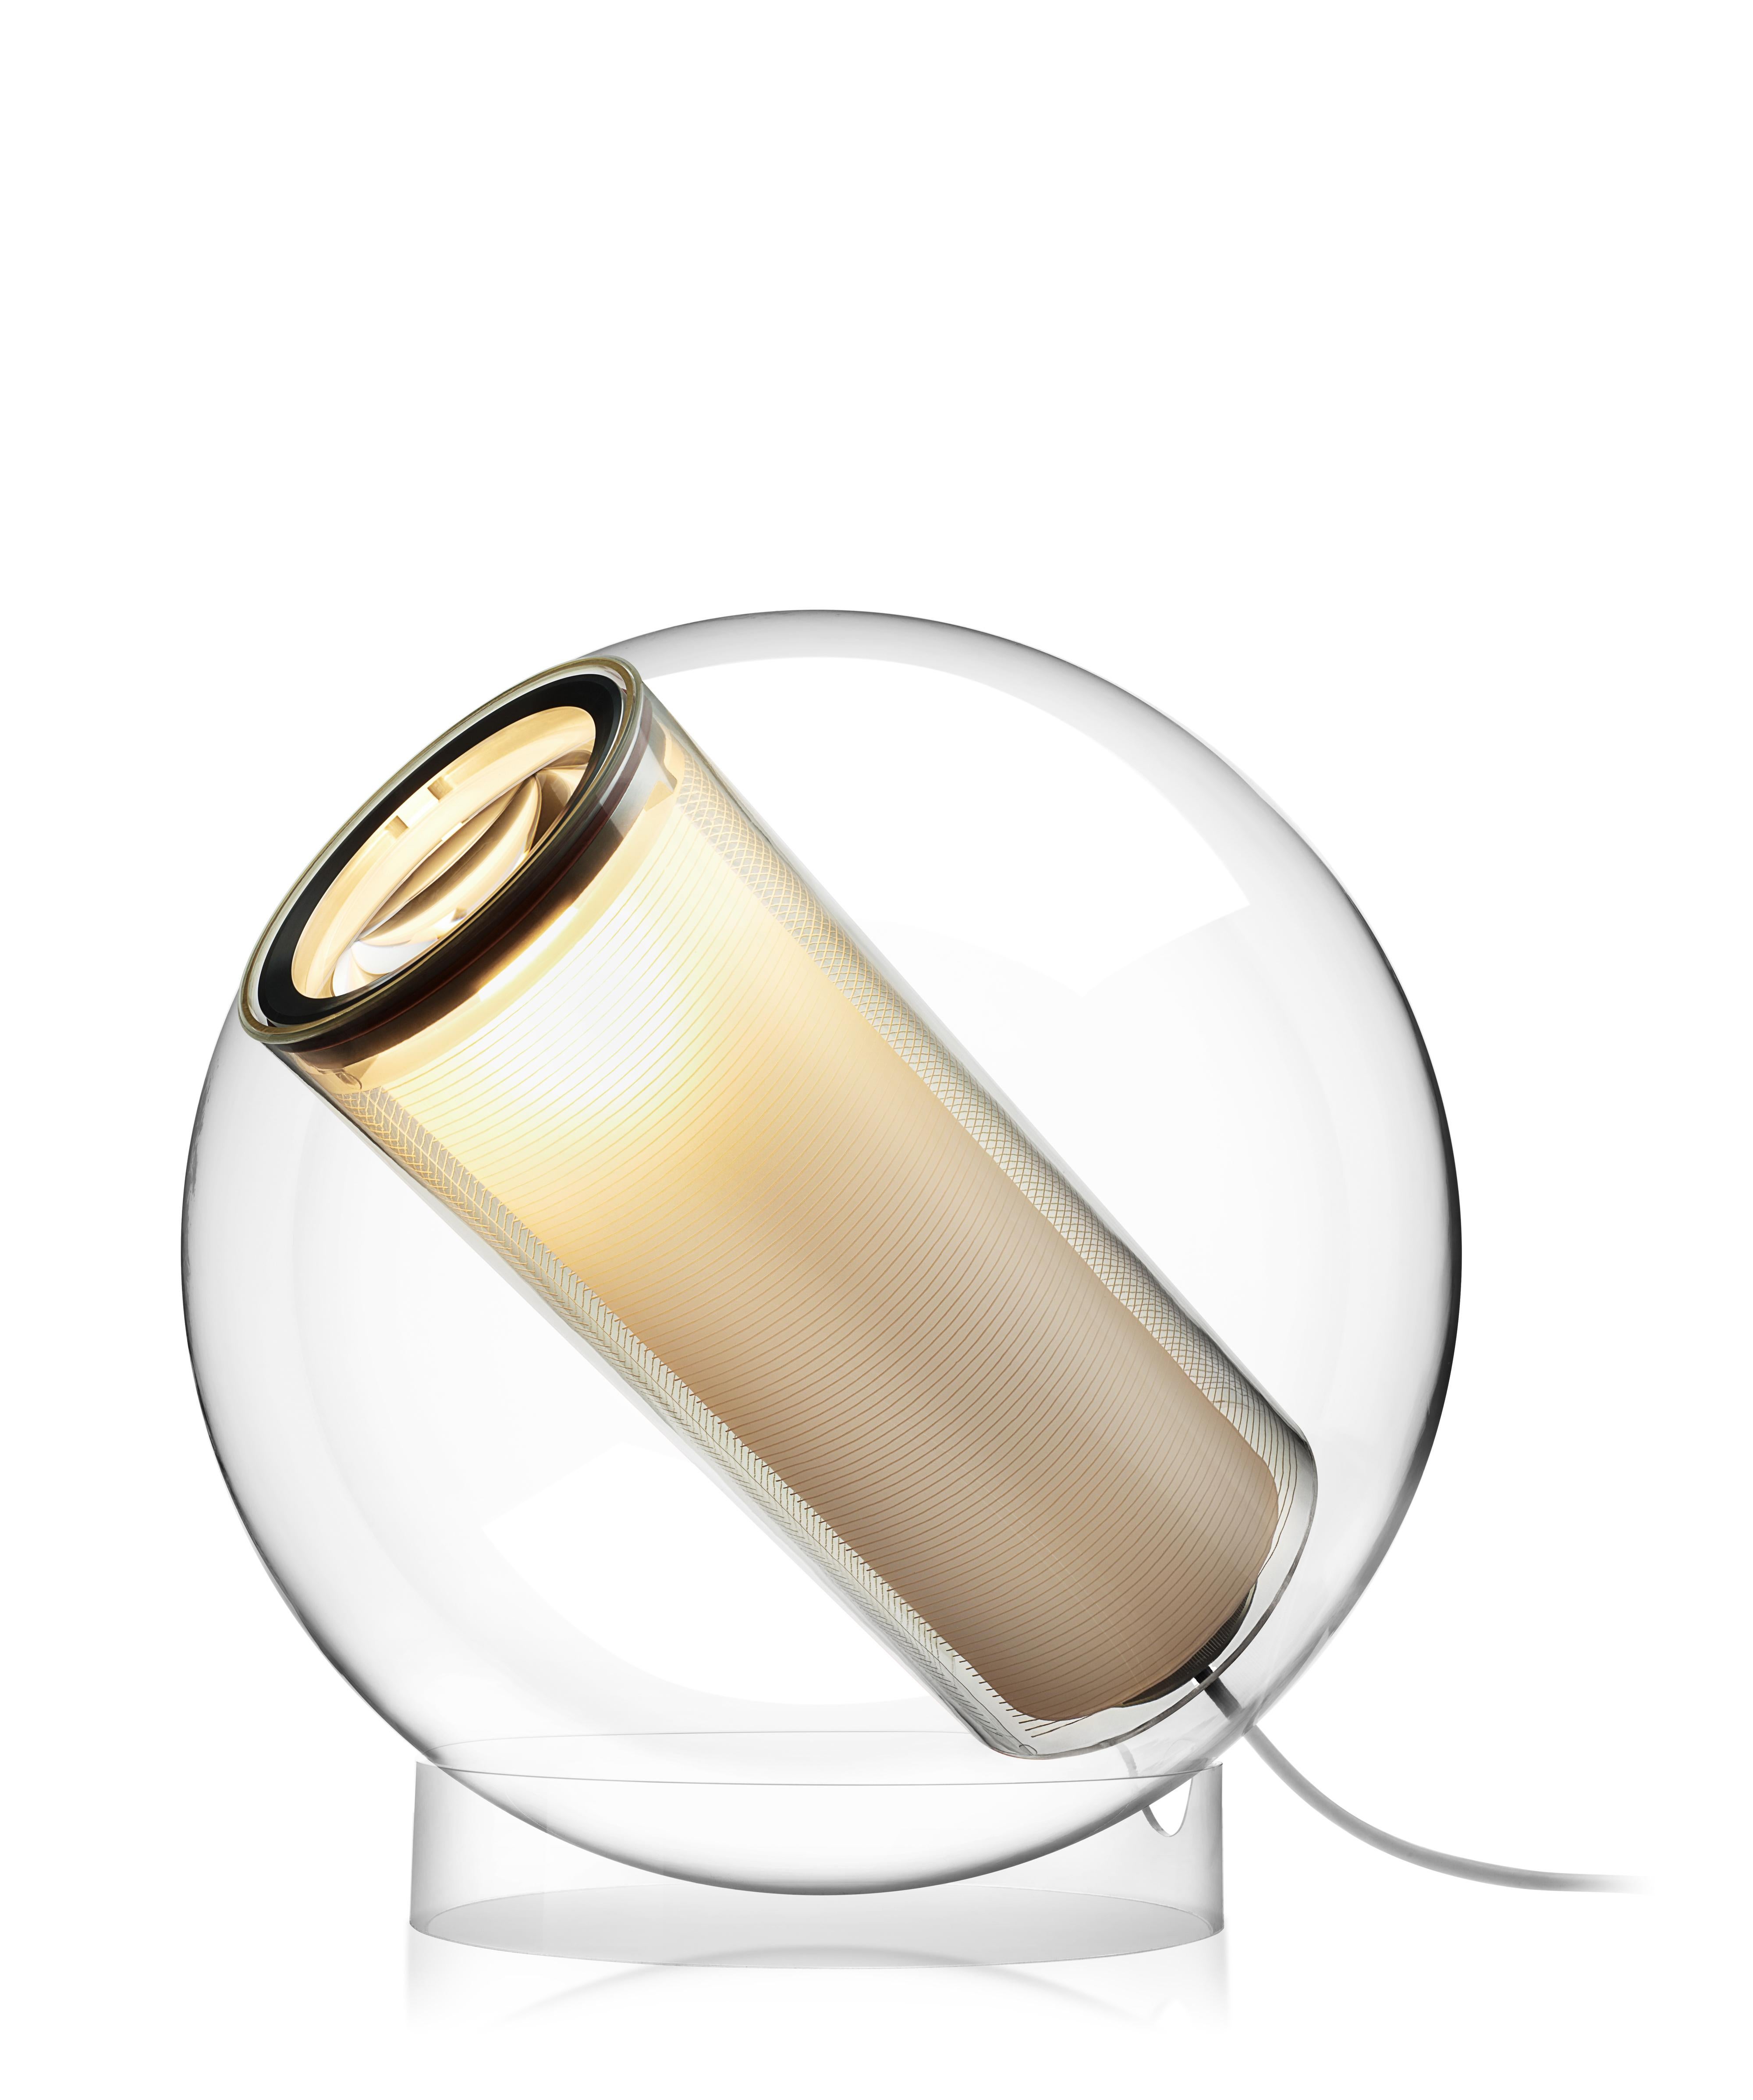 Bel Occhio is both a multi-position spot light and ambient table lamp combined. The spherical acrylic shell is gently cradled in its base allowing infinite adjustment with a touch of the hand. Bel Occhio is also available in pendant